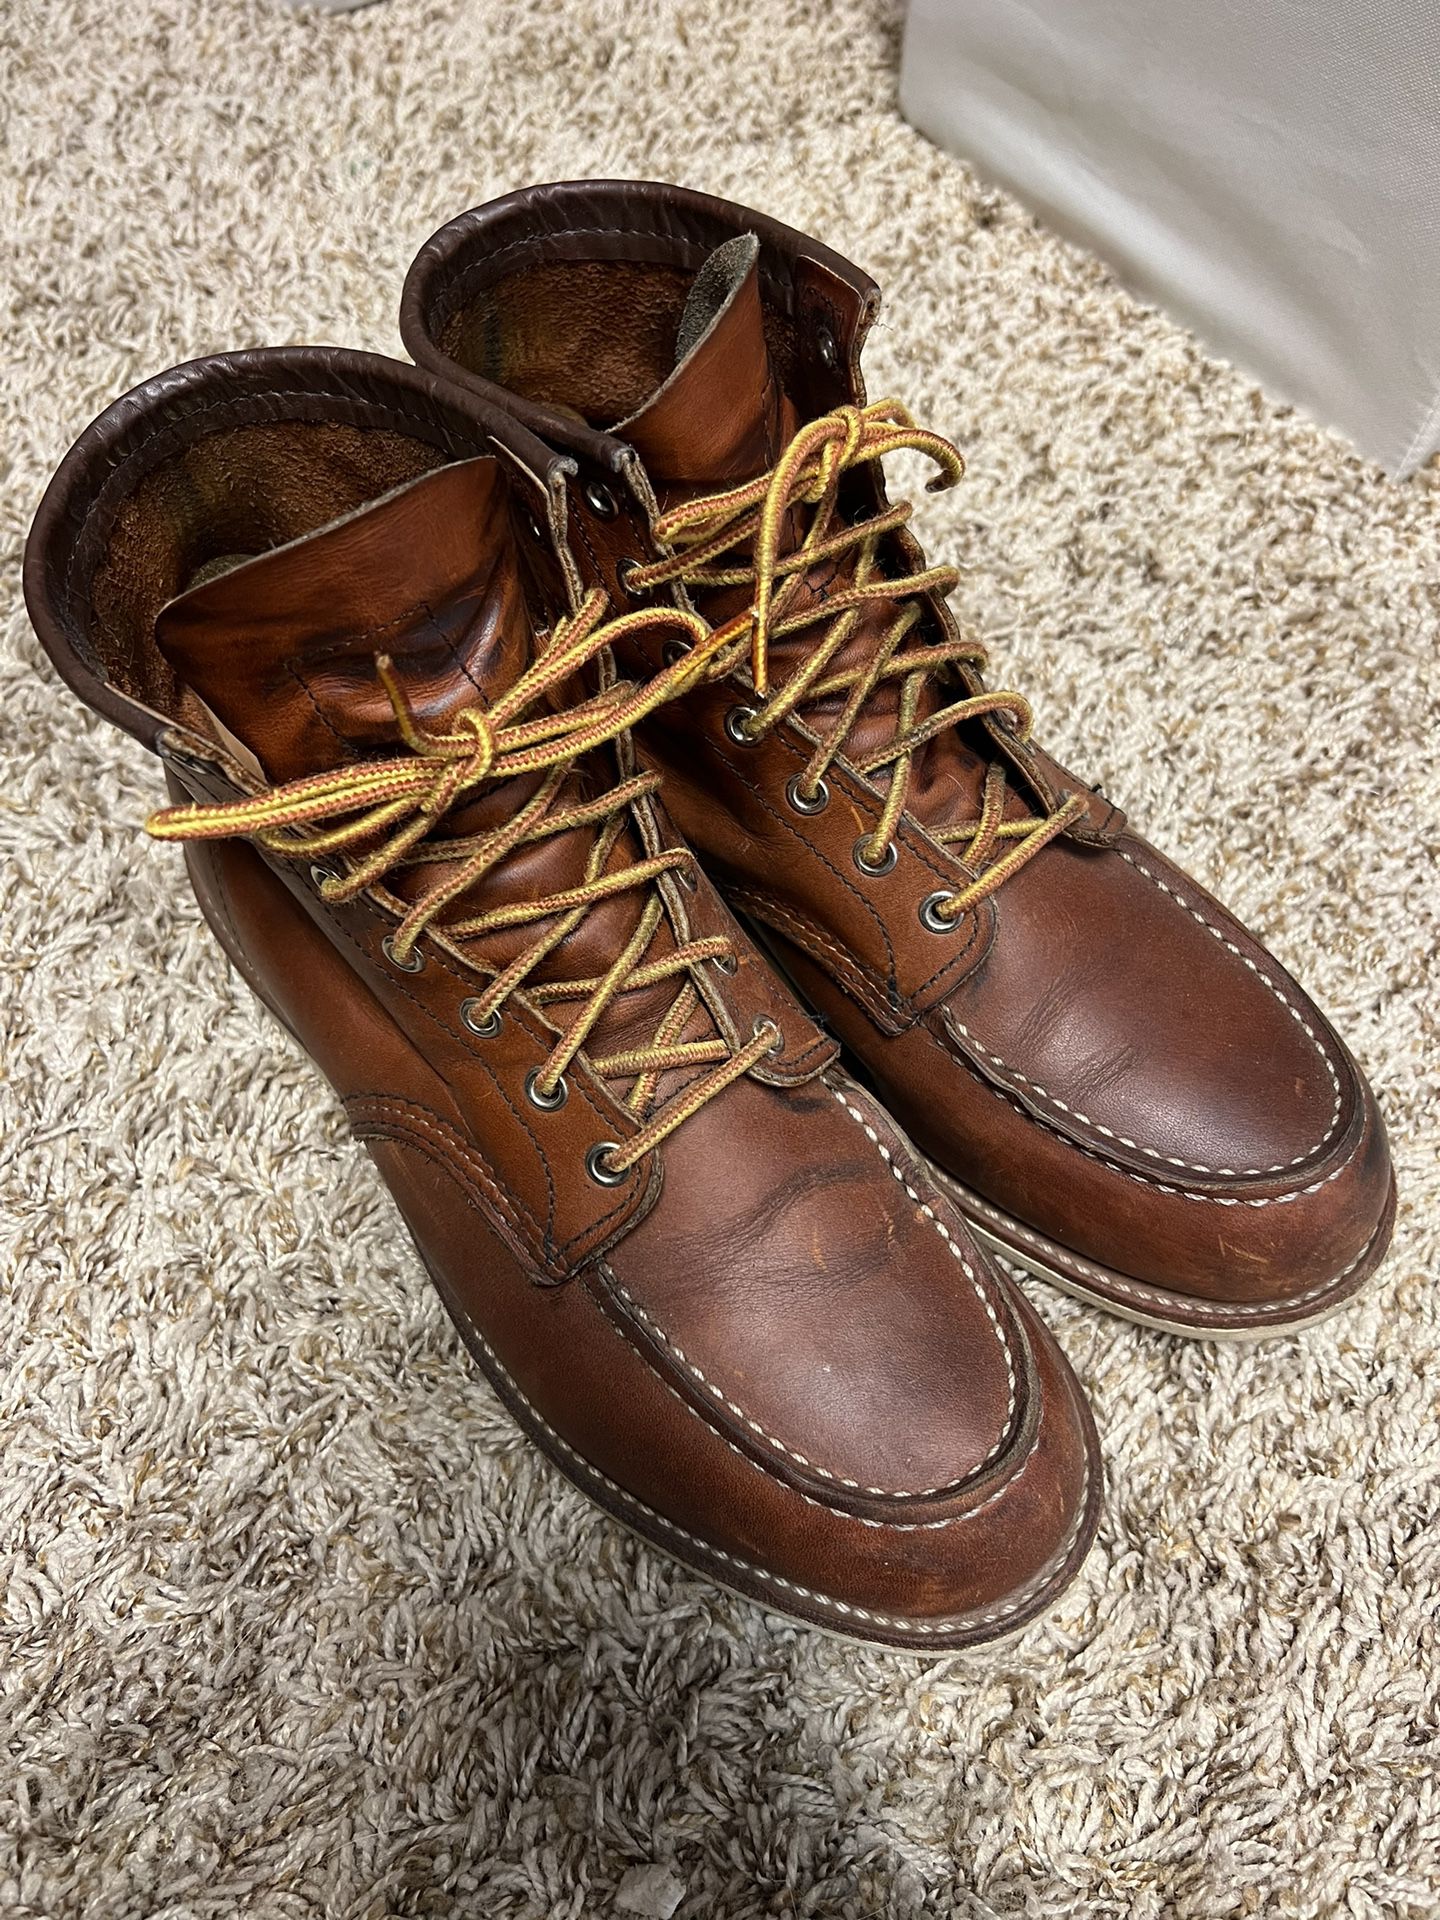 Red Wing Moc Toe 875 Boots; Size 10